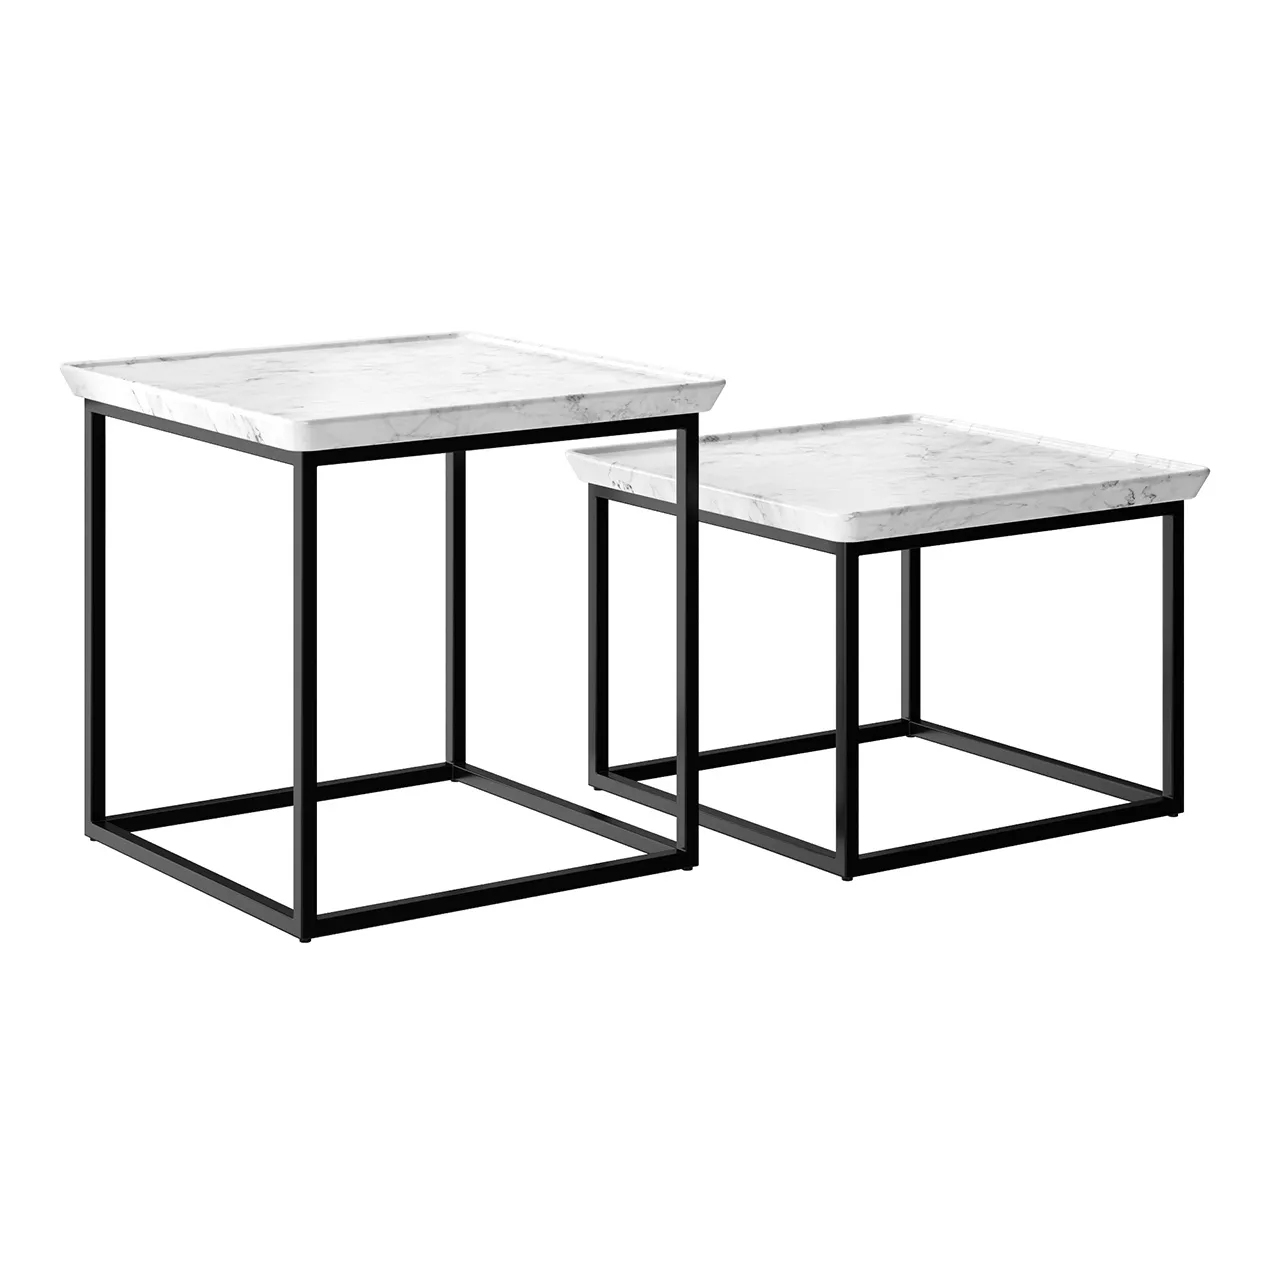 Furniture – 934-side-table-by-rolf-benz